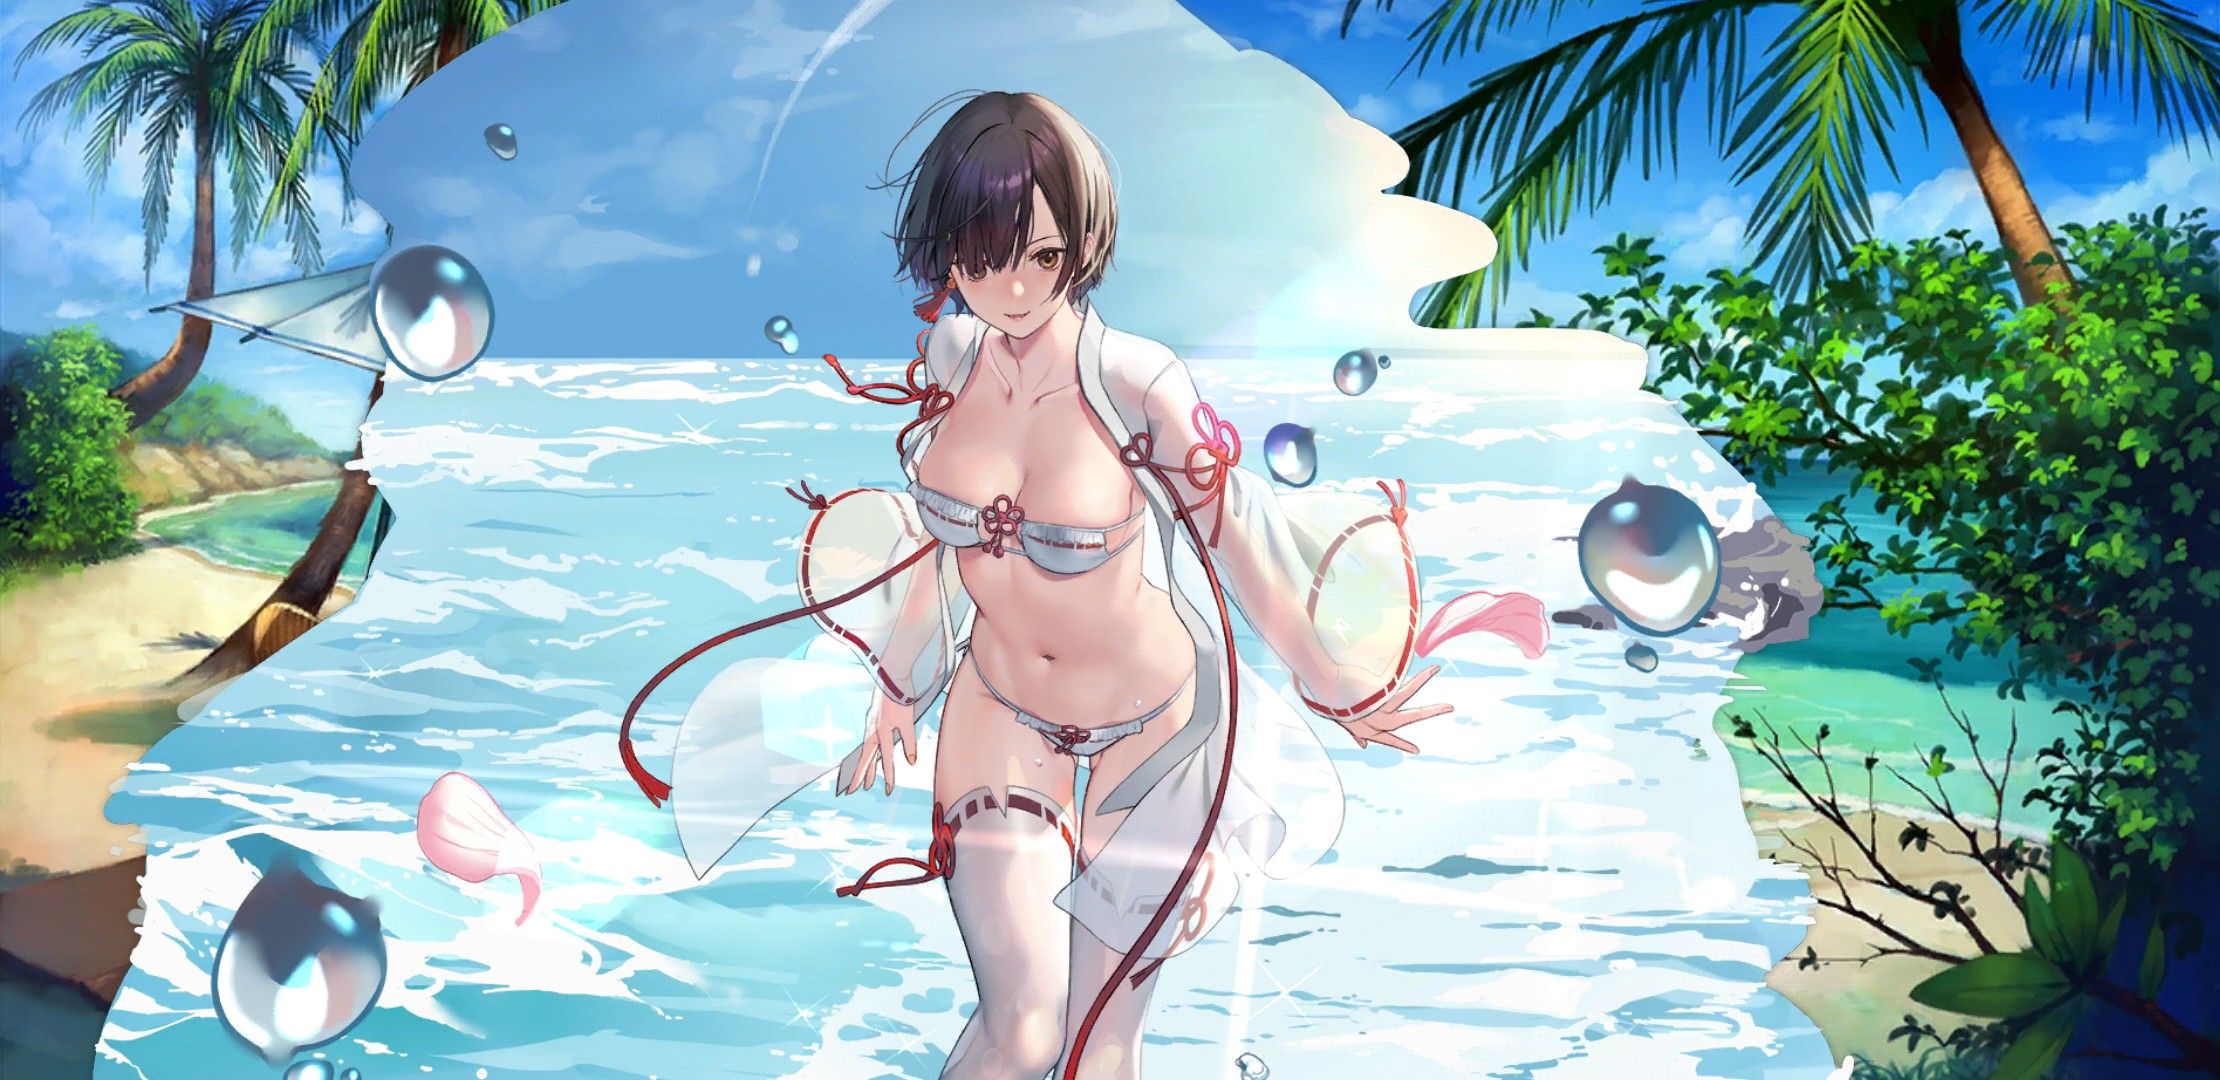 【There is an image】 Smartphone that urges charging with erotic swimsuits is malicious 13